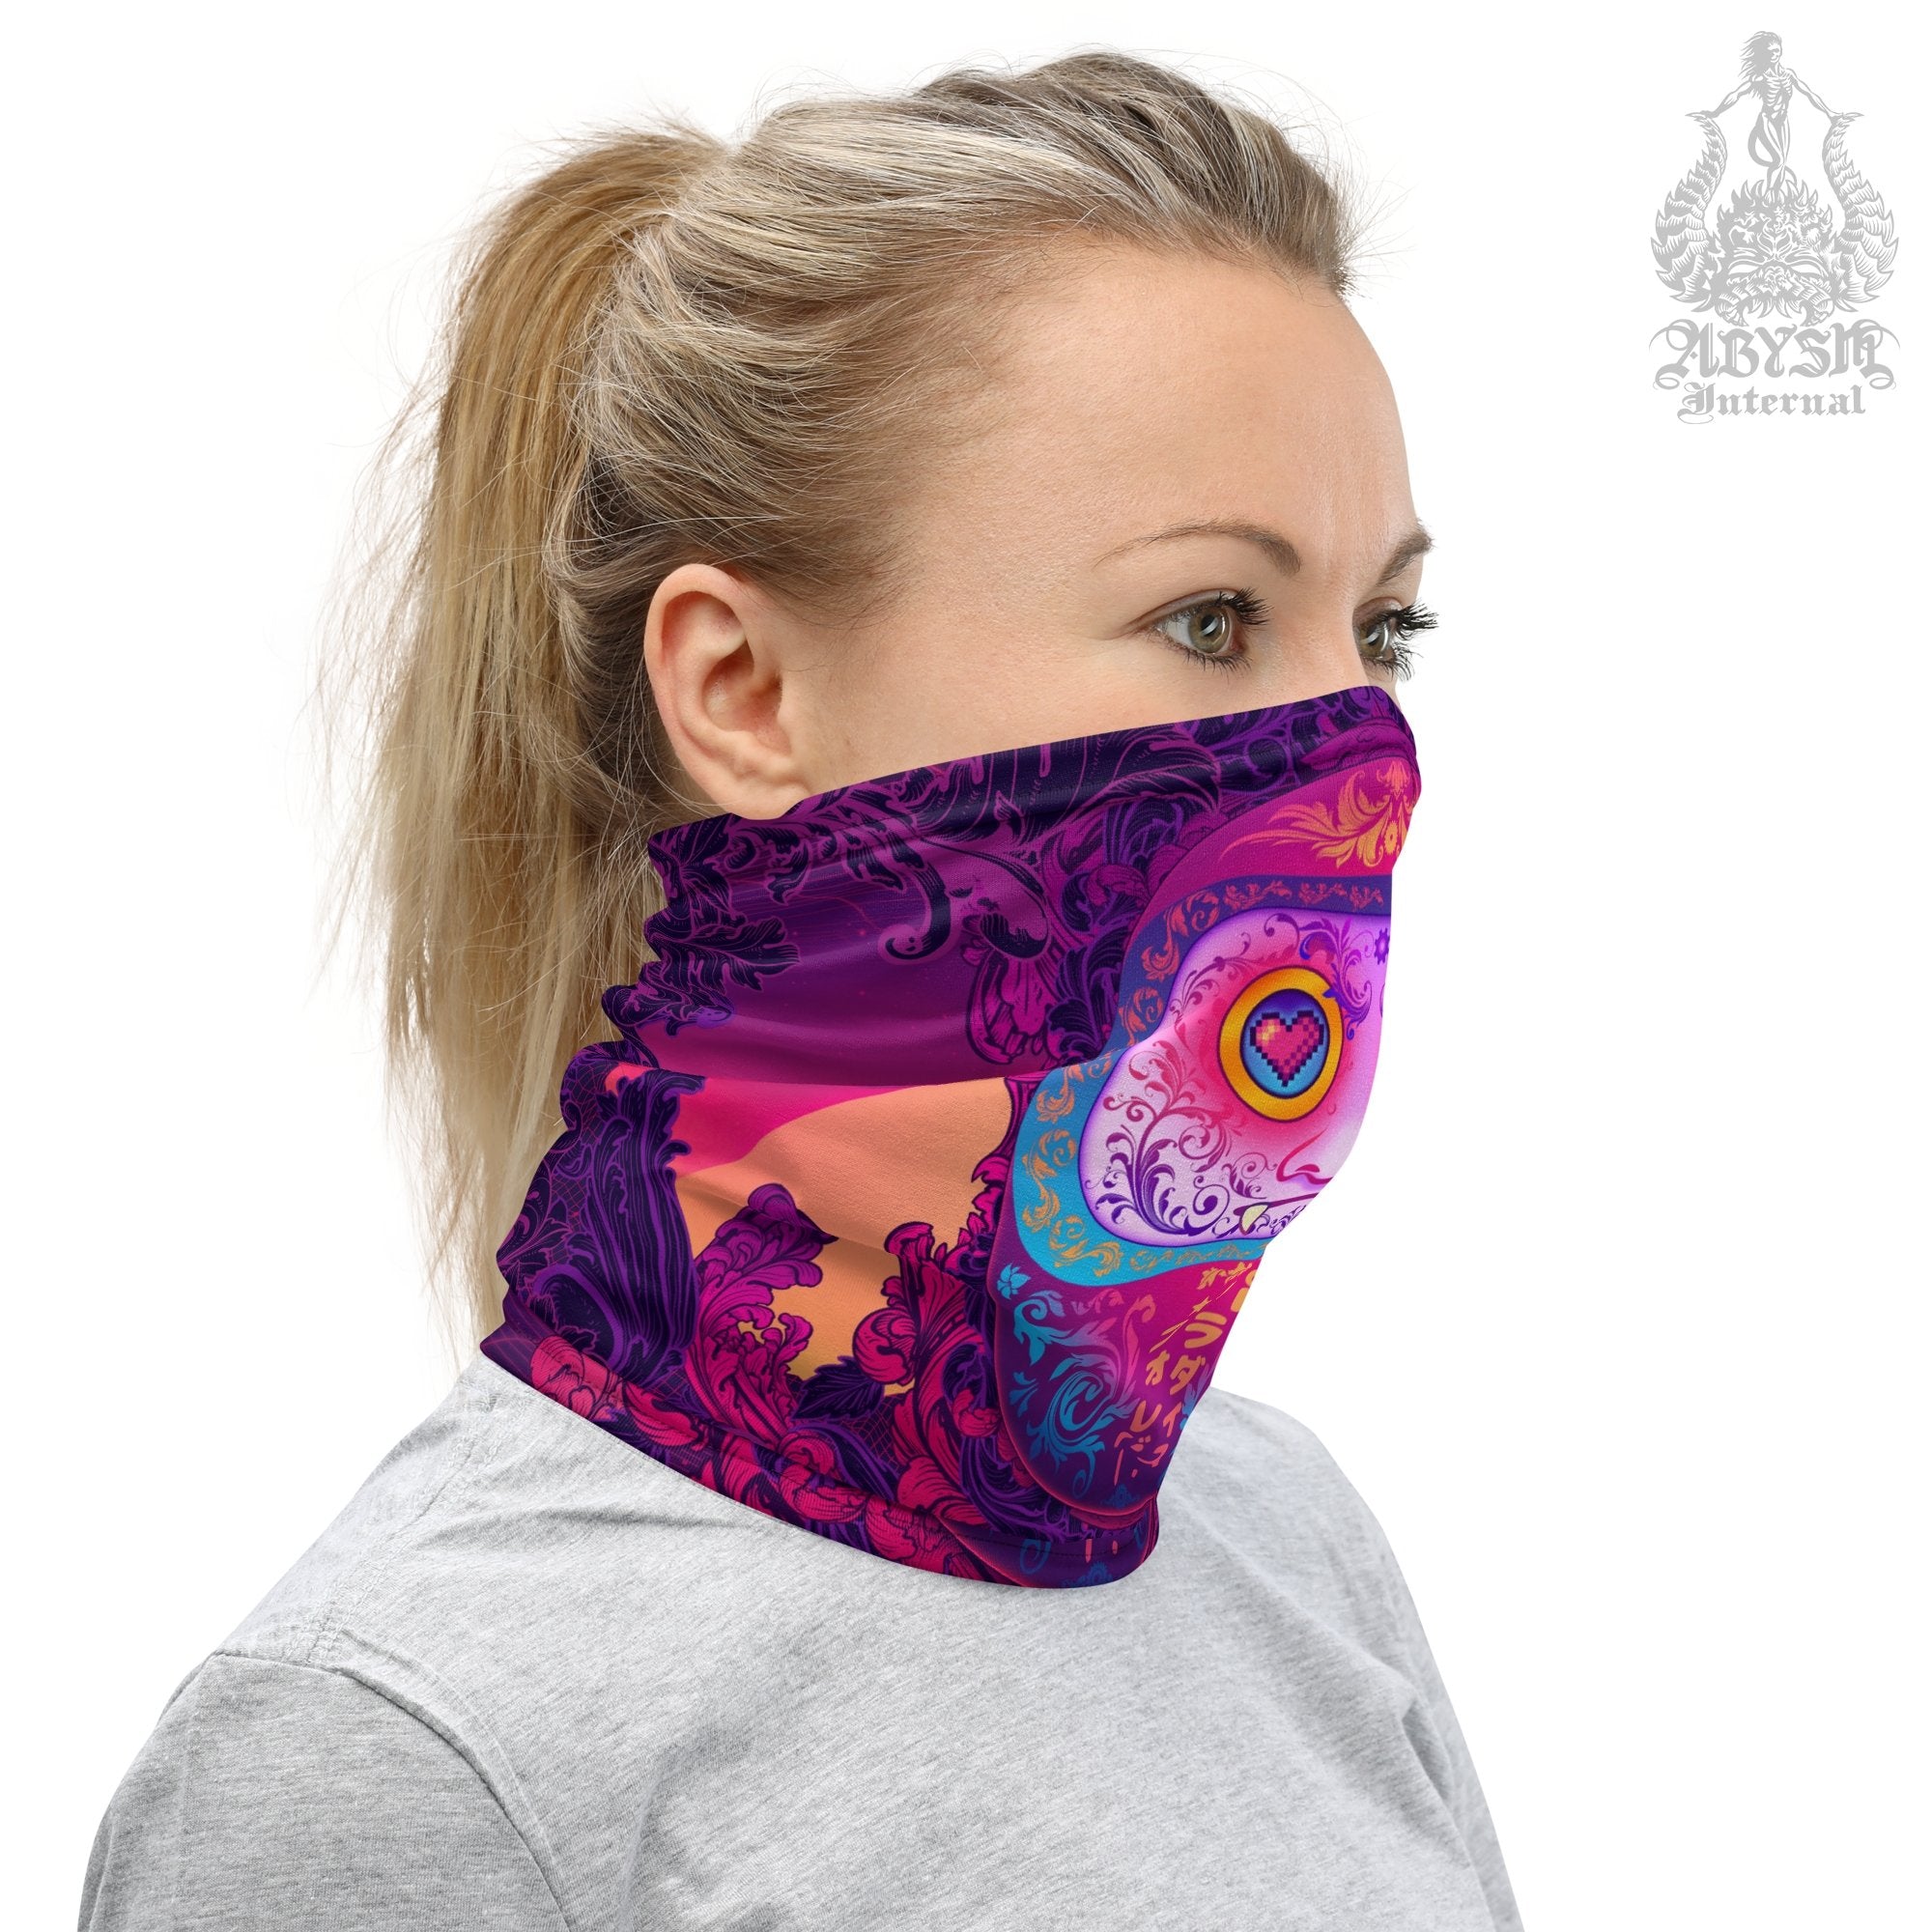 Japanese Vaporwave Neck Gaiter, Face Mask, Synthwave Head Covering, Psychedelic 80s Retrowave, Anime and Manga Convention or Outfit - Daruma - Abysm Internal